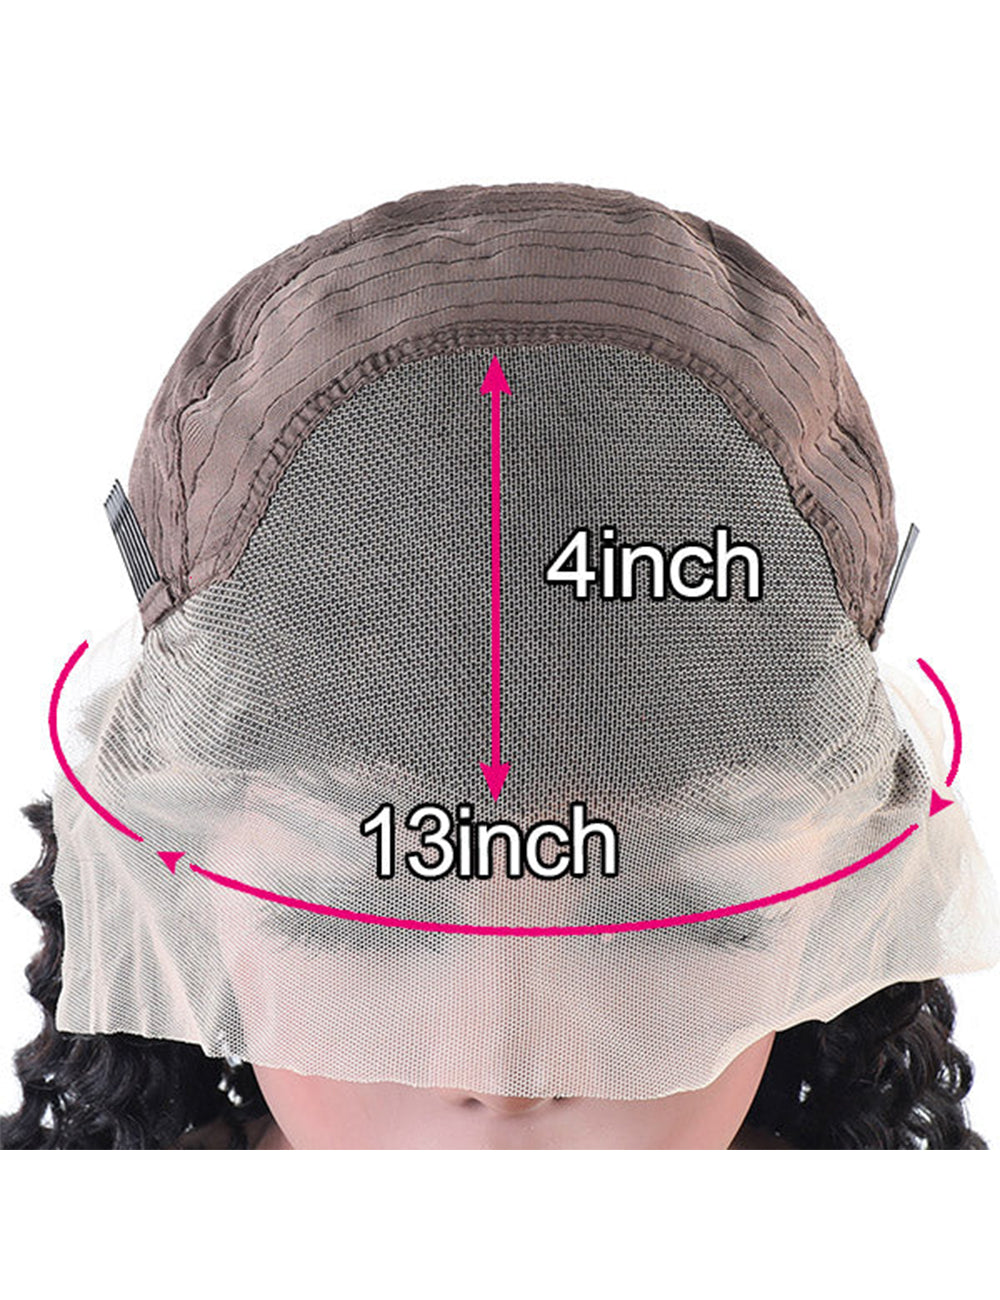 Loose Wave Lace Front Pre Bleached Wig 13x4 HD Transparent Lace Wig Brazilian Human Hair Wig